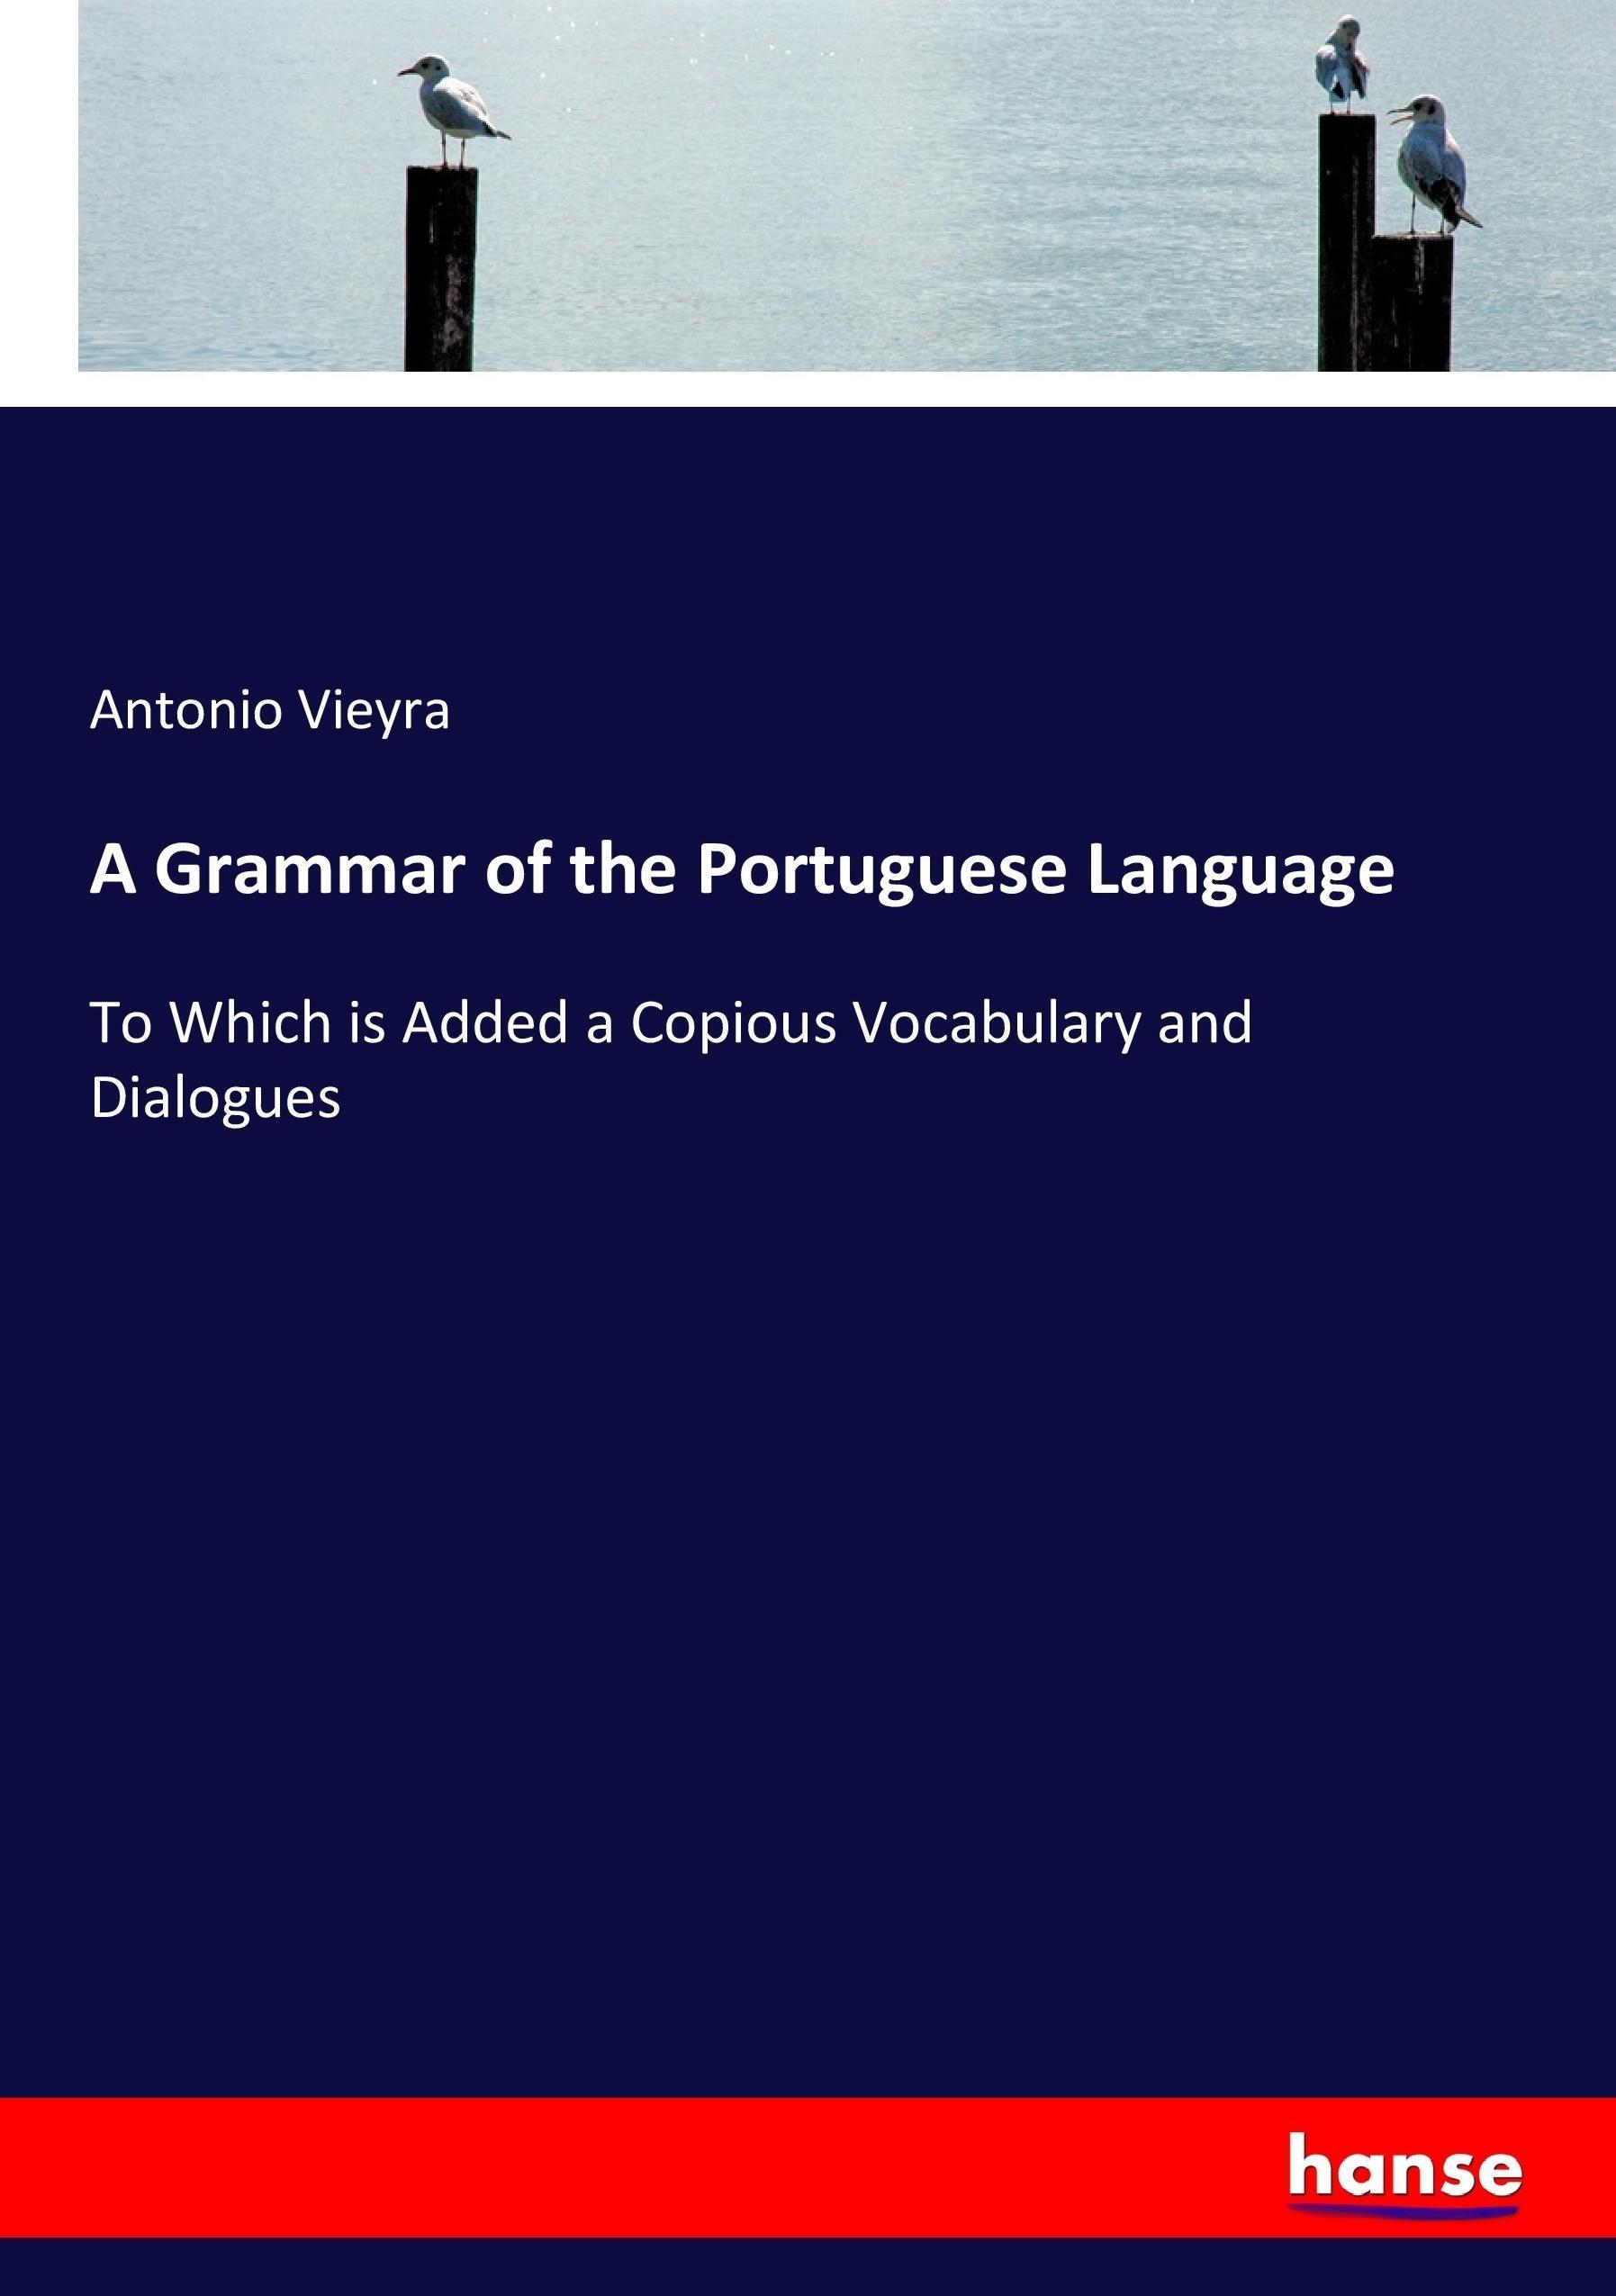 A Grammar of the Portuguese Language | To Which is Added a Copious Vocabulary and Dialogues | Antonio Vieyra | Taschenbuch | Paperback | 444 S. | Englisch | 2017 | hansebooks | EAN 9783337085636 - Vieyra, Antonio